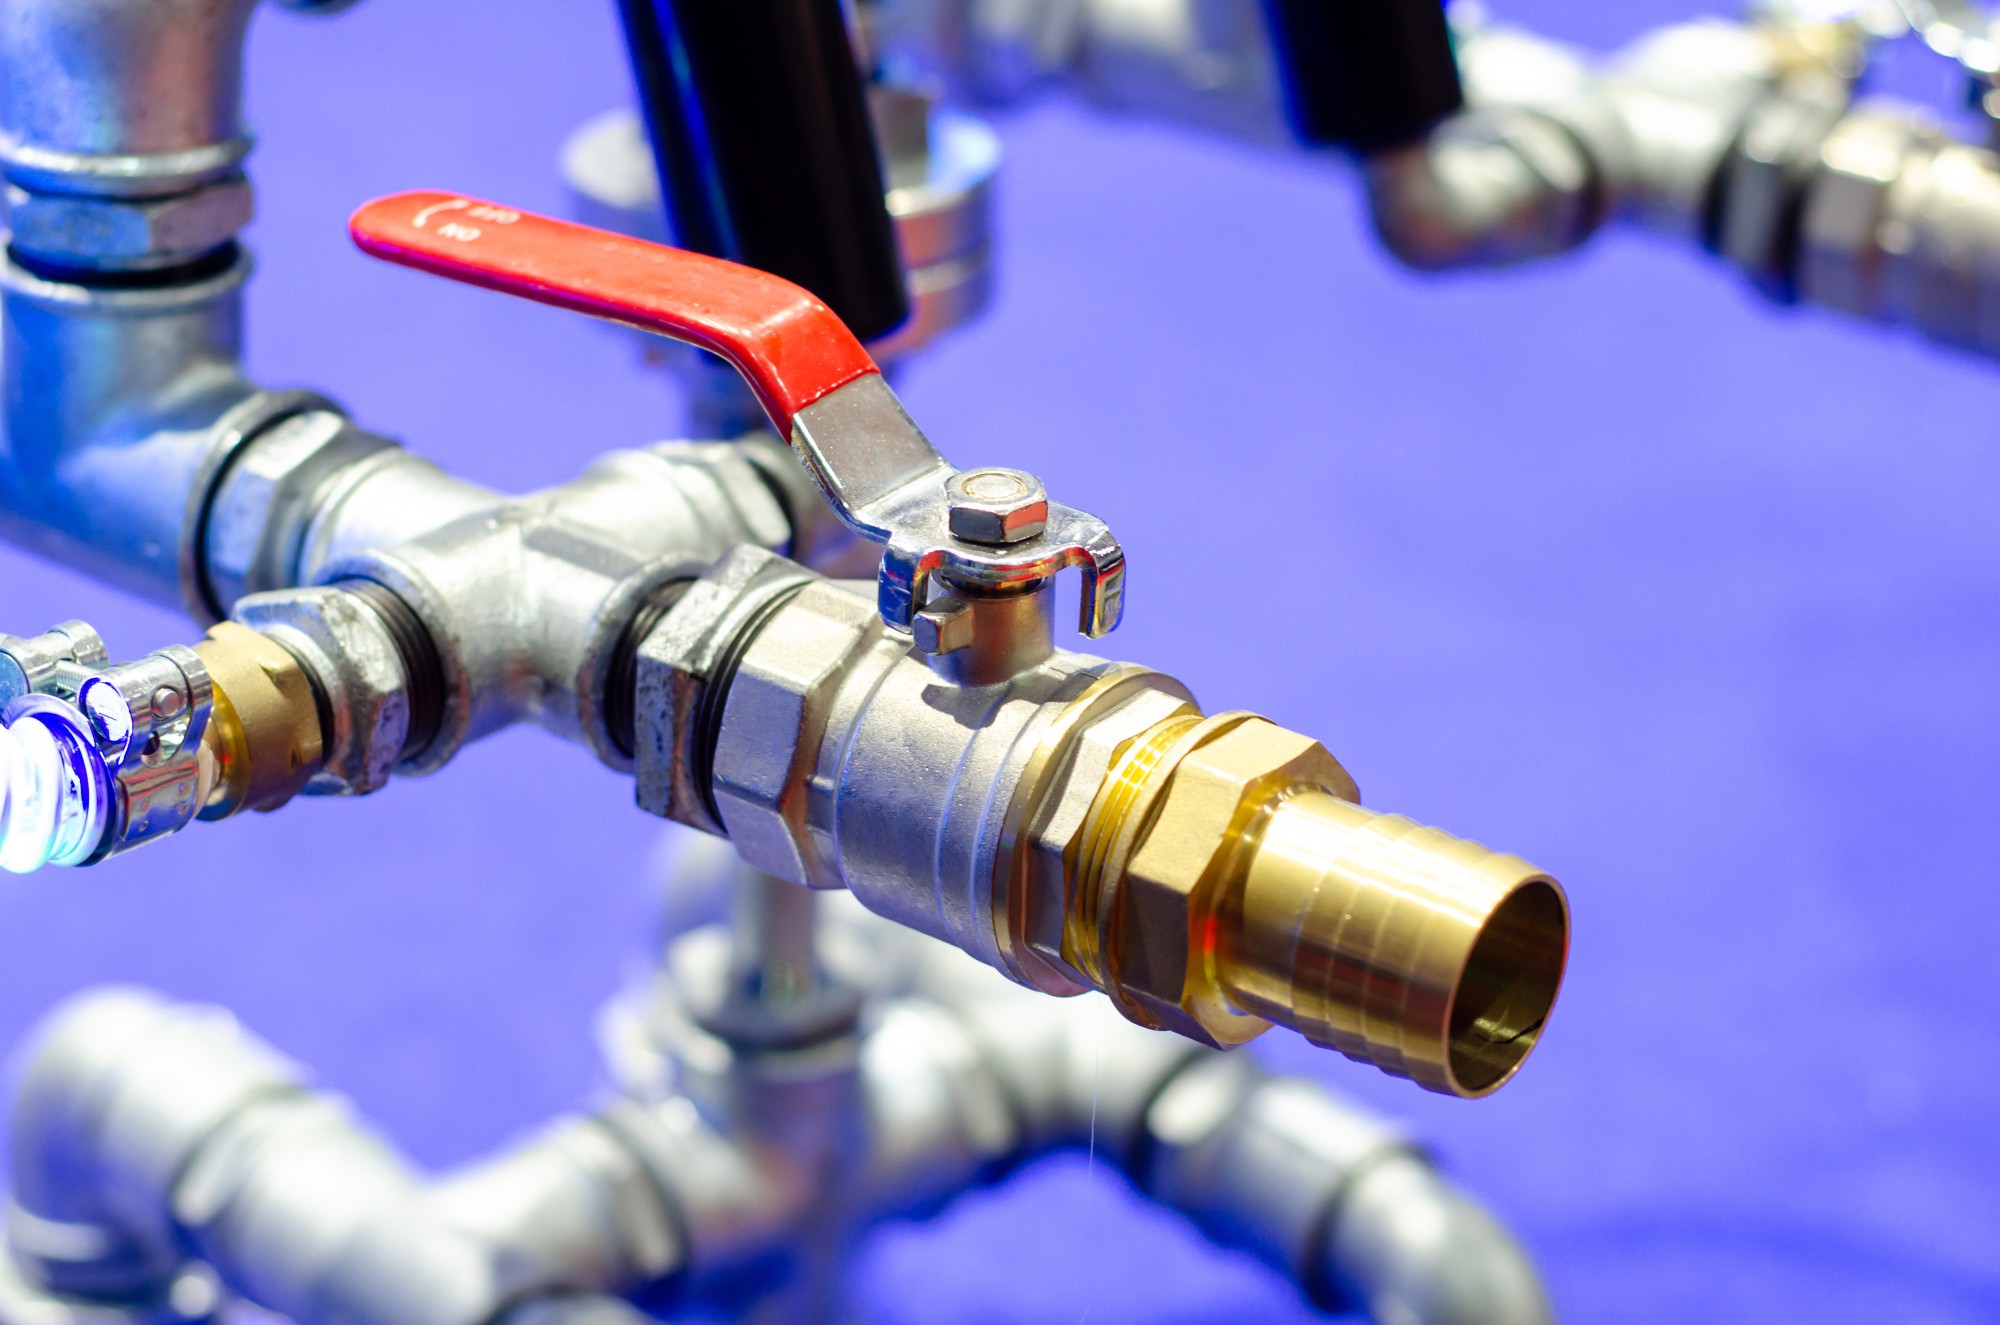 Gate Valves vs Ball Valves: Which One Do You Need?